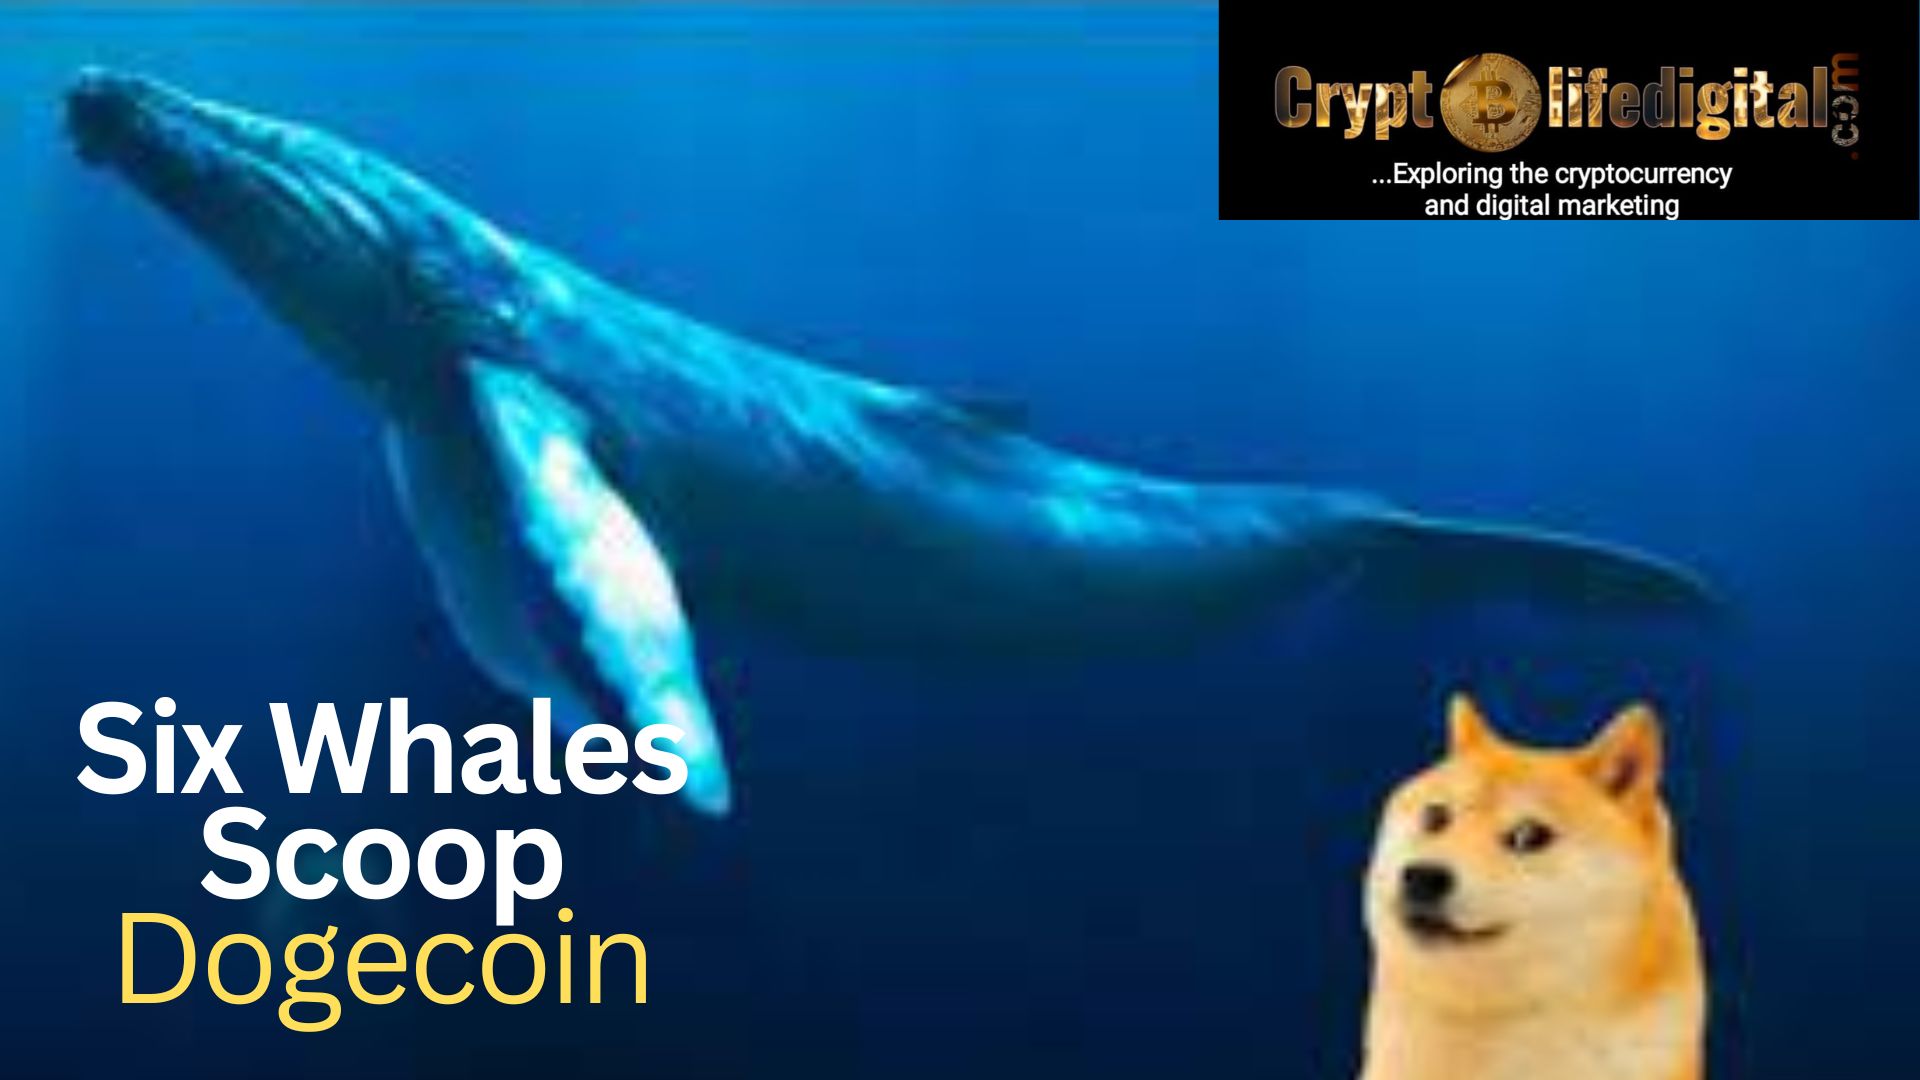 Six Dogecoin Whales Jointly Purchased A Whopping 620 Million Worth About $37.2 Million, Dogecoin Spikes By 5.13% Over the Past Week